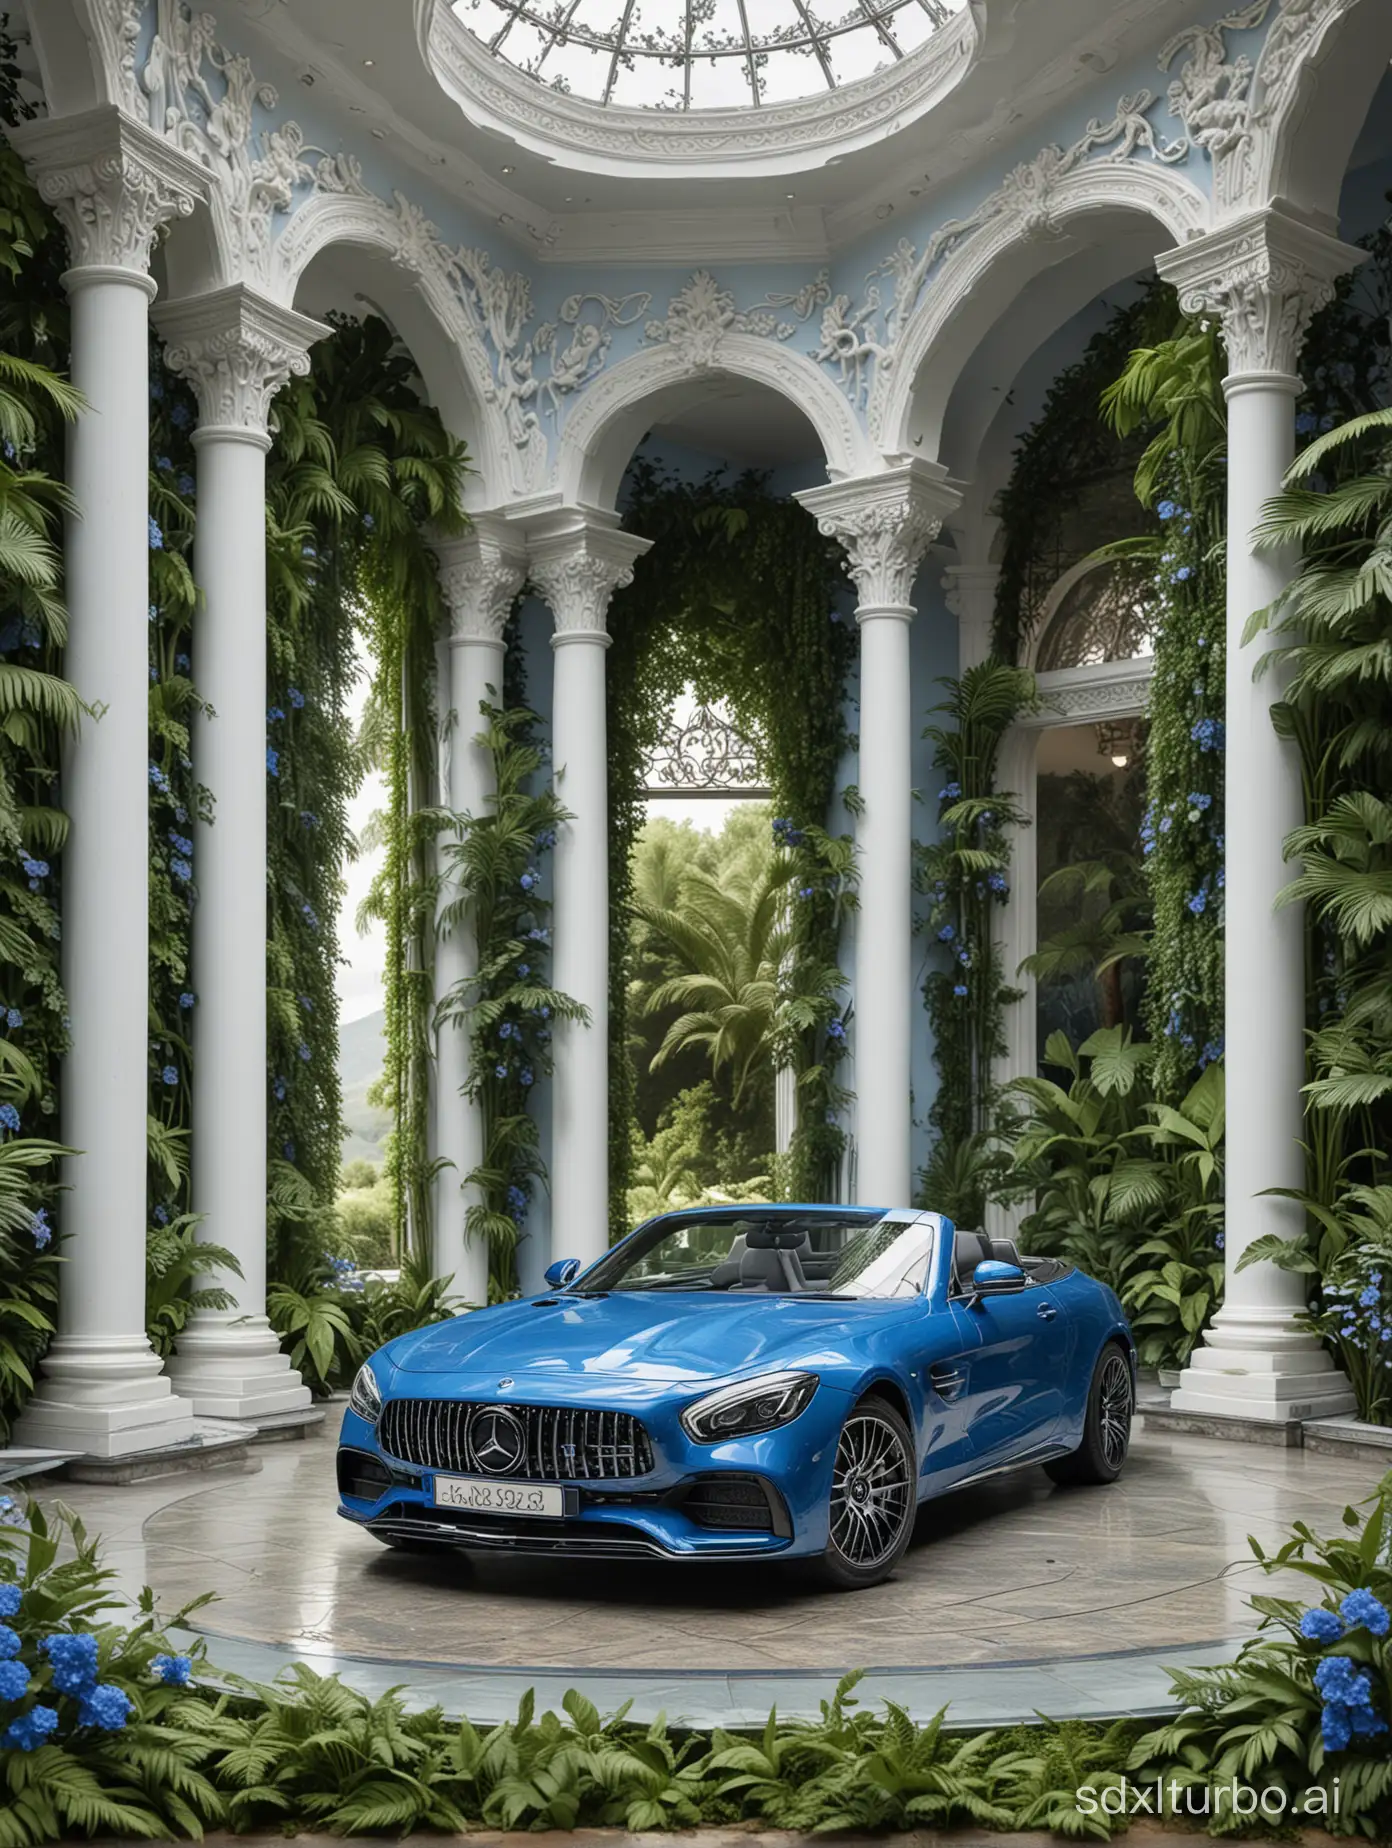 realistic image of a extravagant showroom with a BLUE Mercedez car, with intricate carvings and intricate details, surrounded by the lush greenery of the landscape, modern, luxurious and exuberant mansion with BLUE details. Blue flowers vegetation.